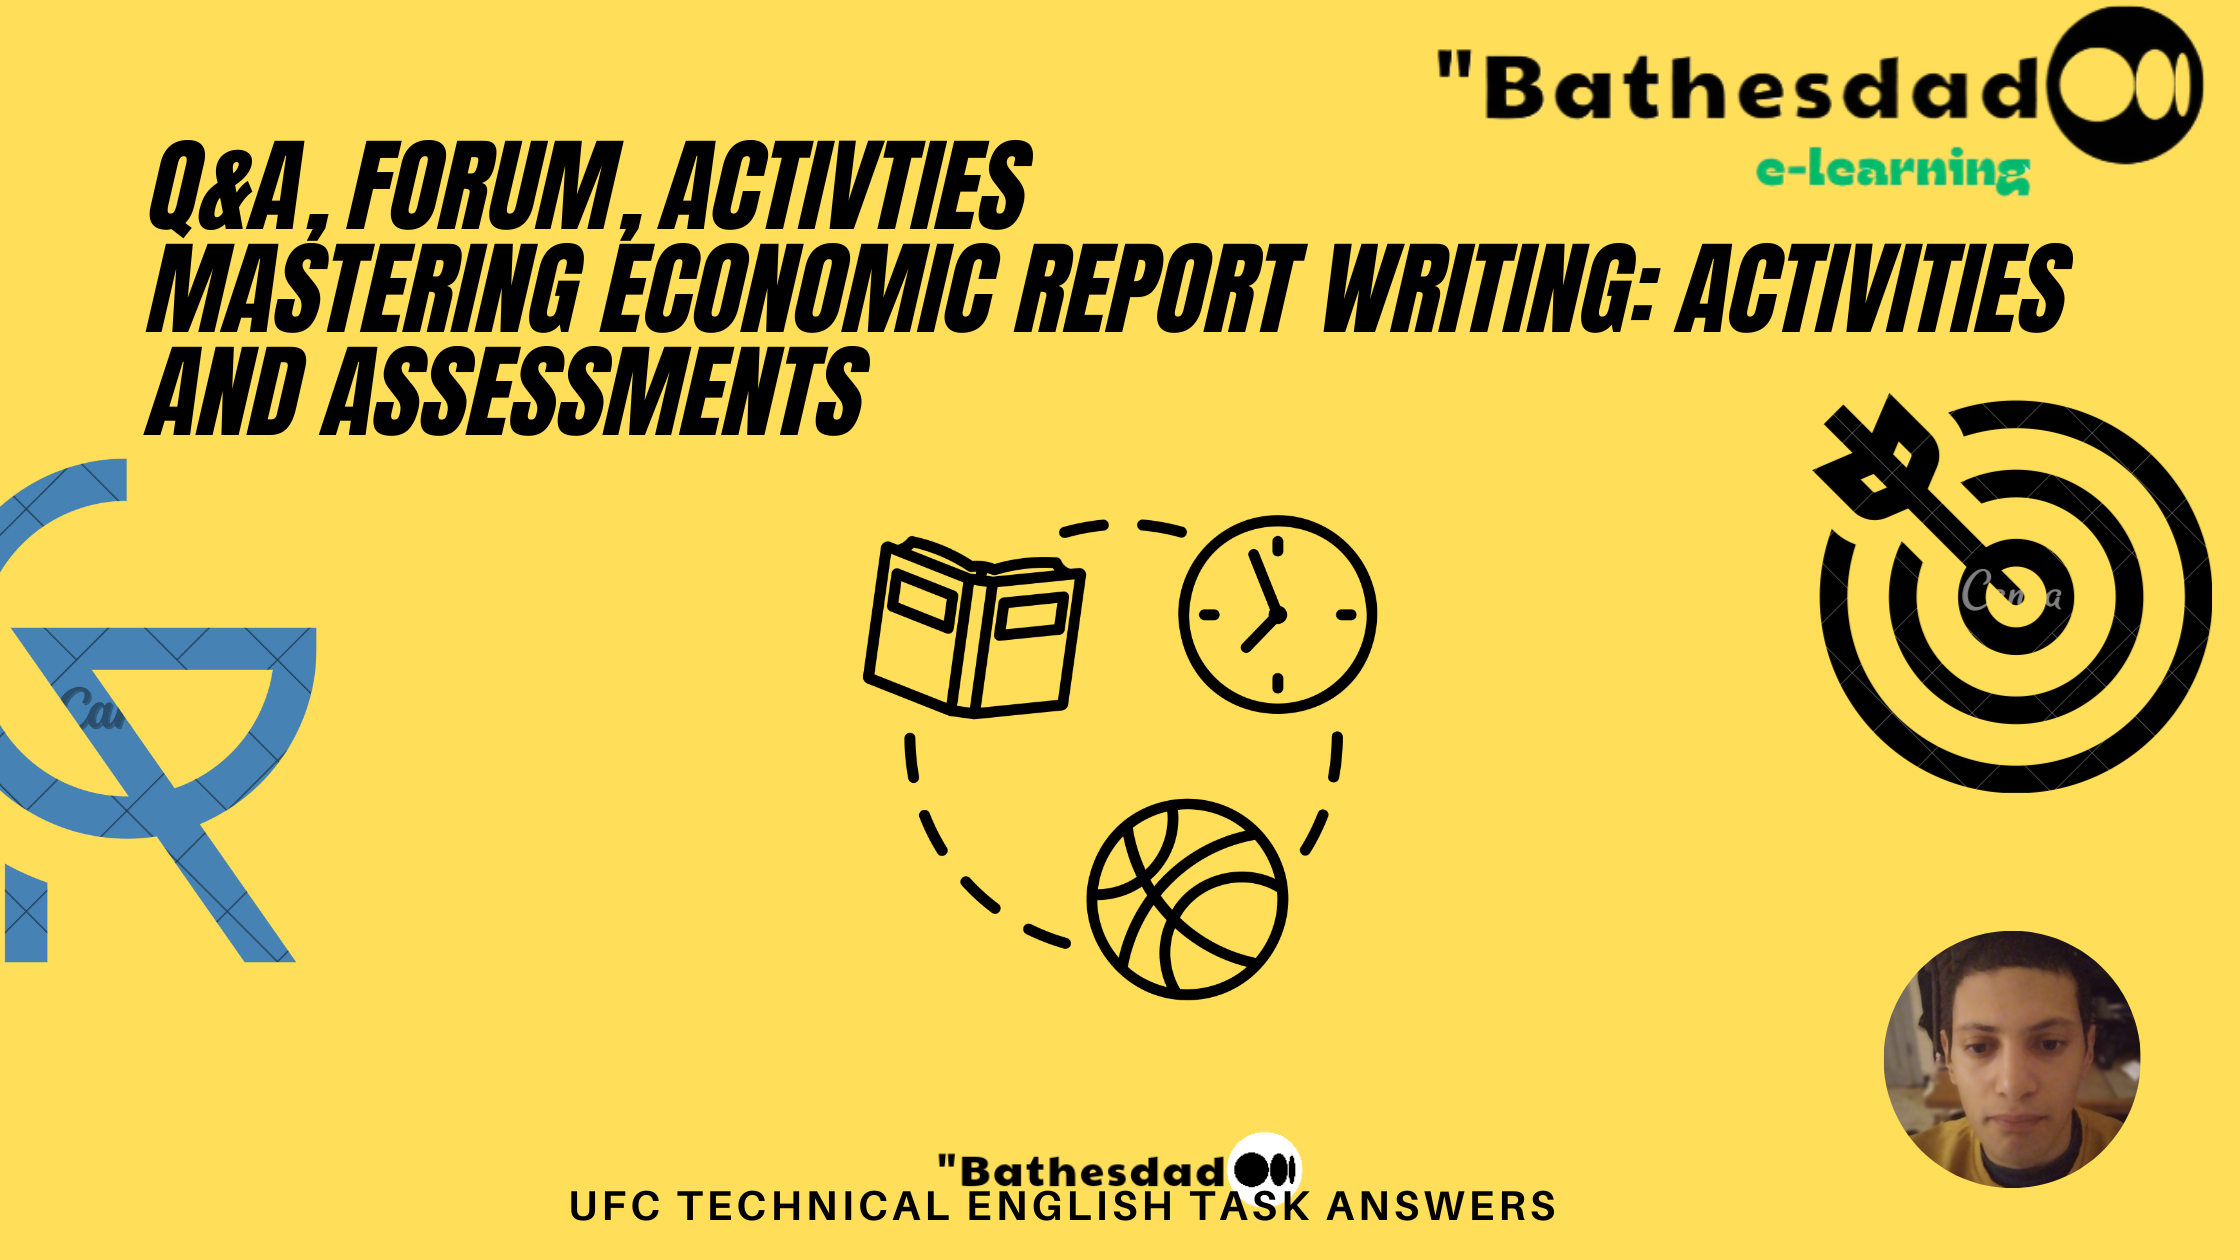 Mastering Economic Report Writing: Activities and Assessments